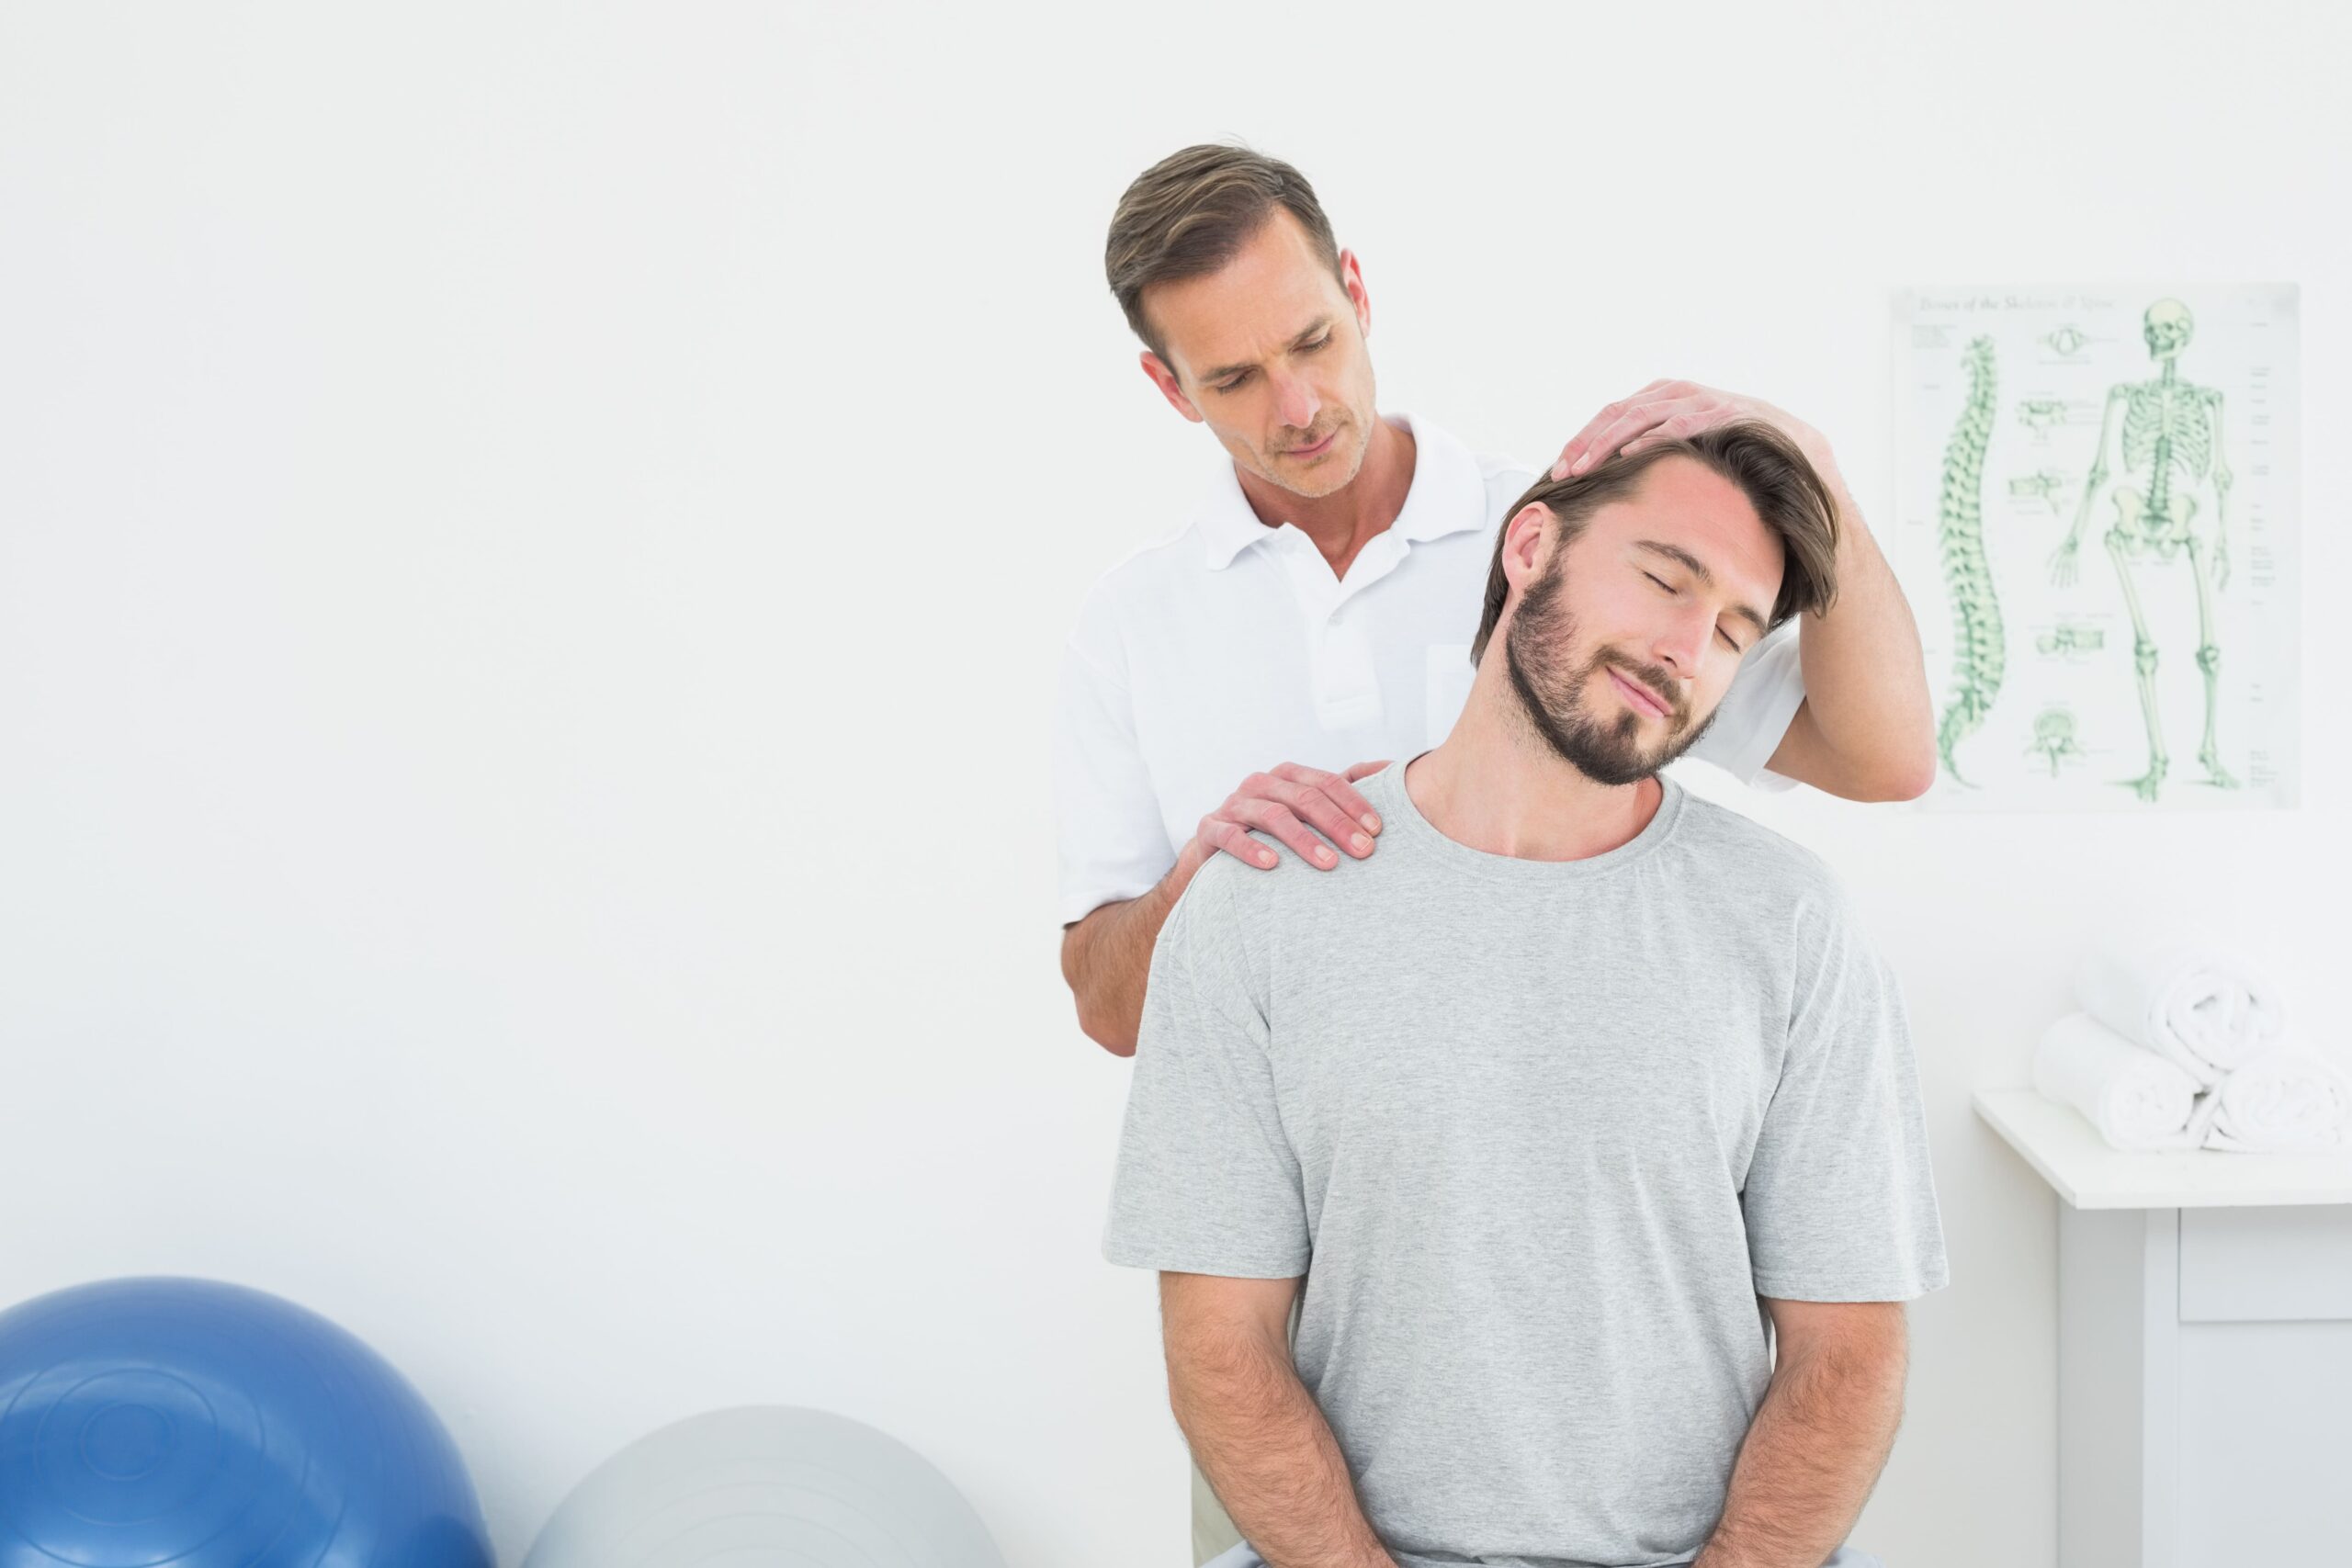 How Chiropractic Care can Help with Headaches and Migraines